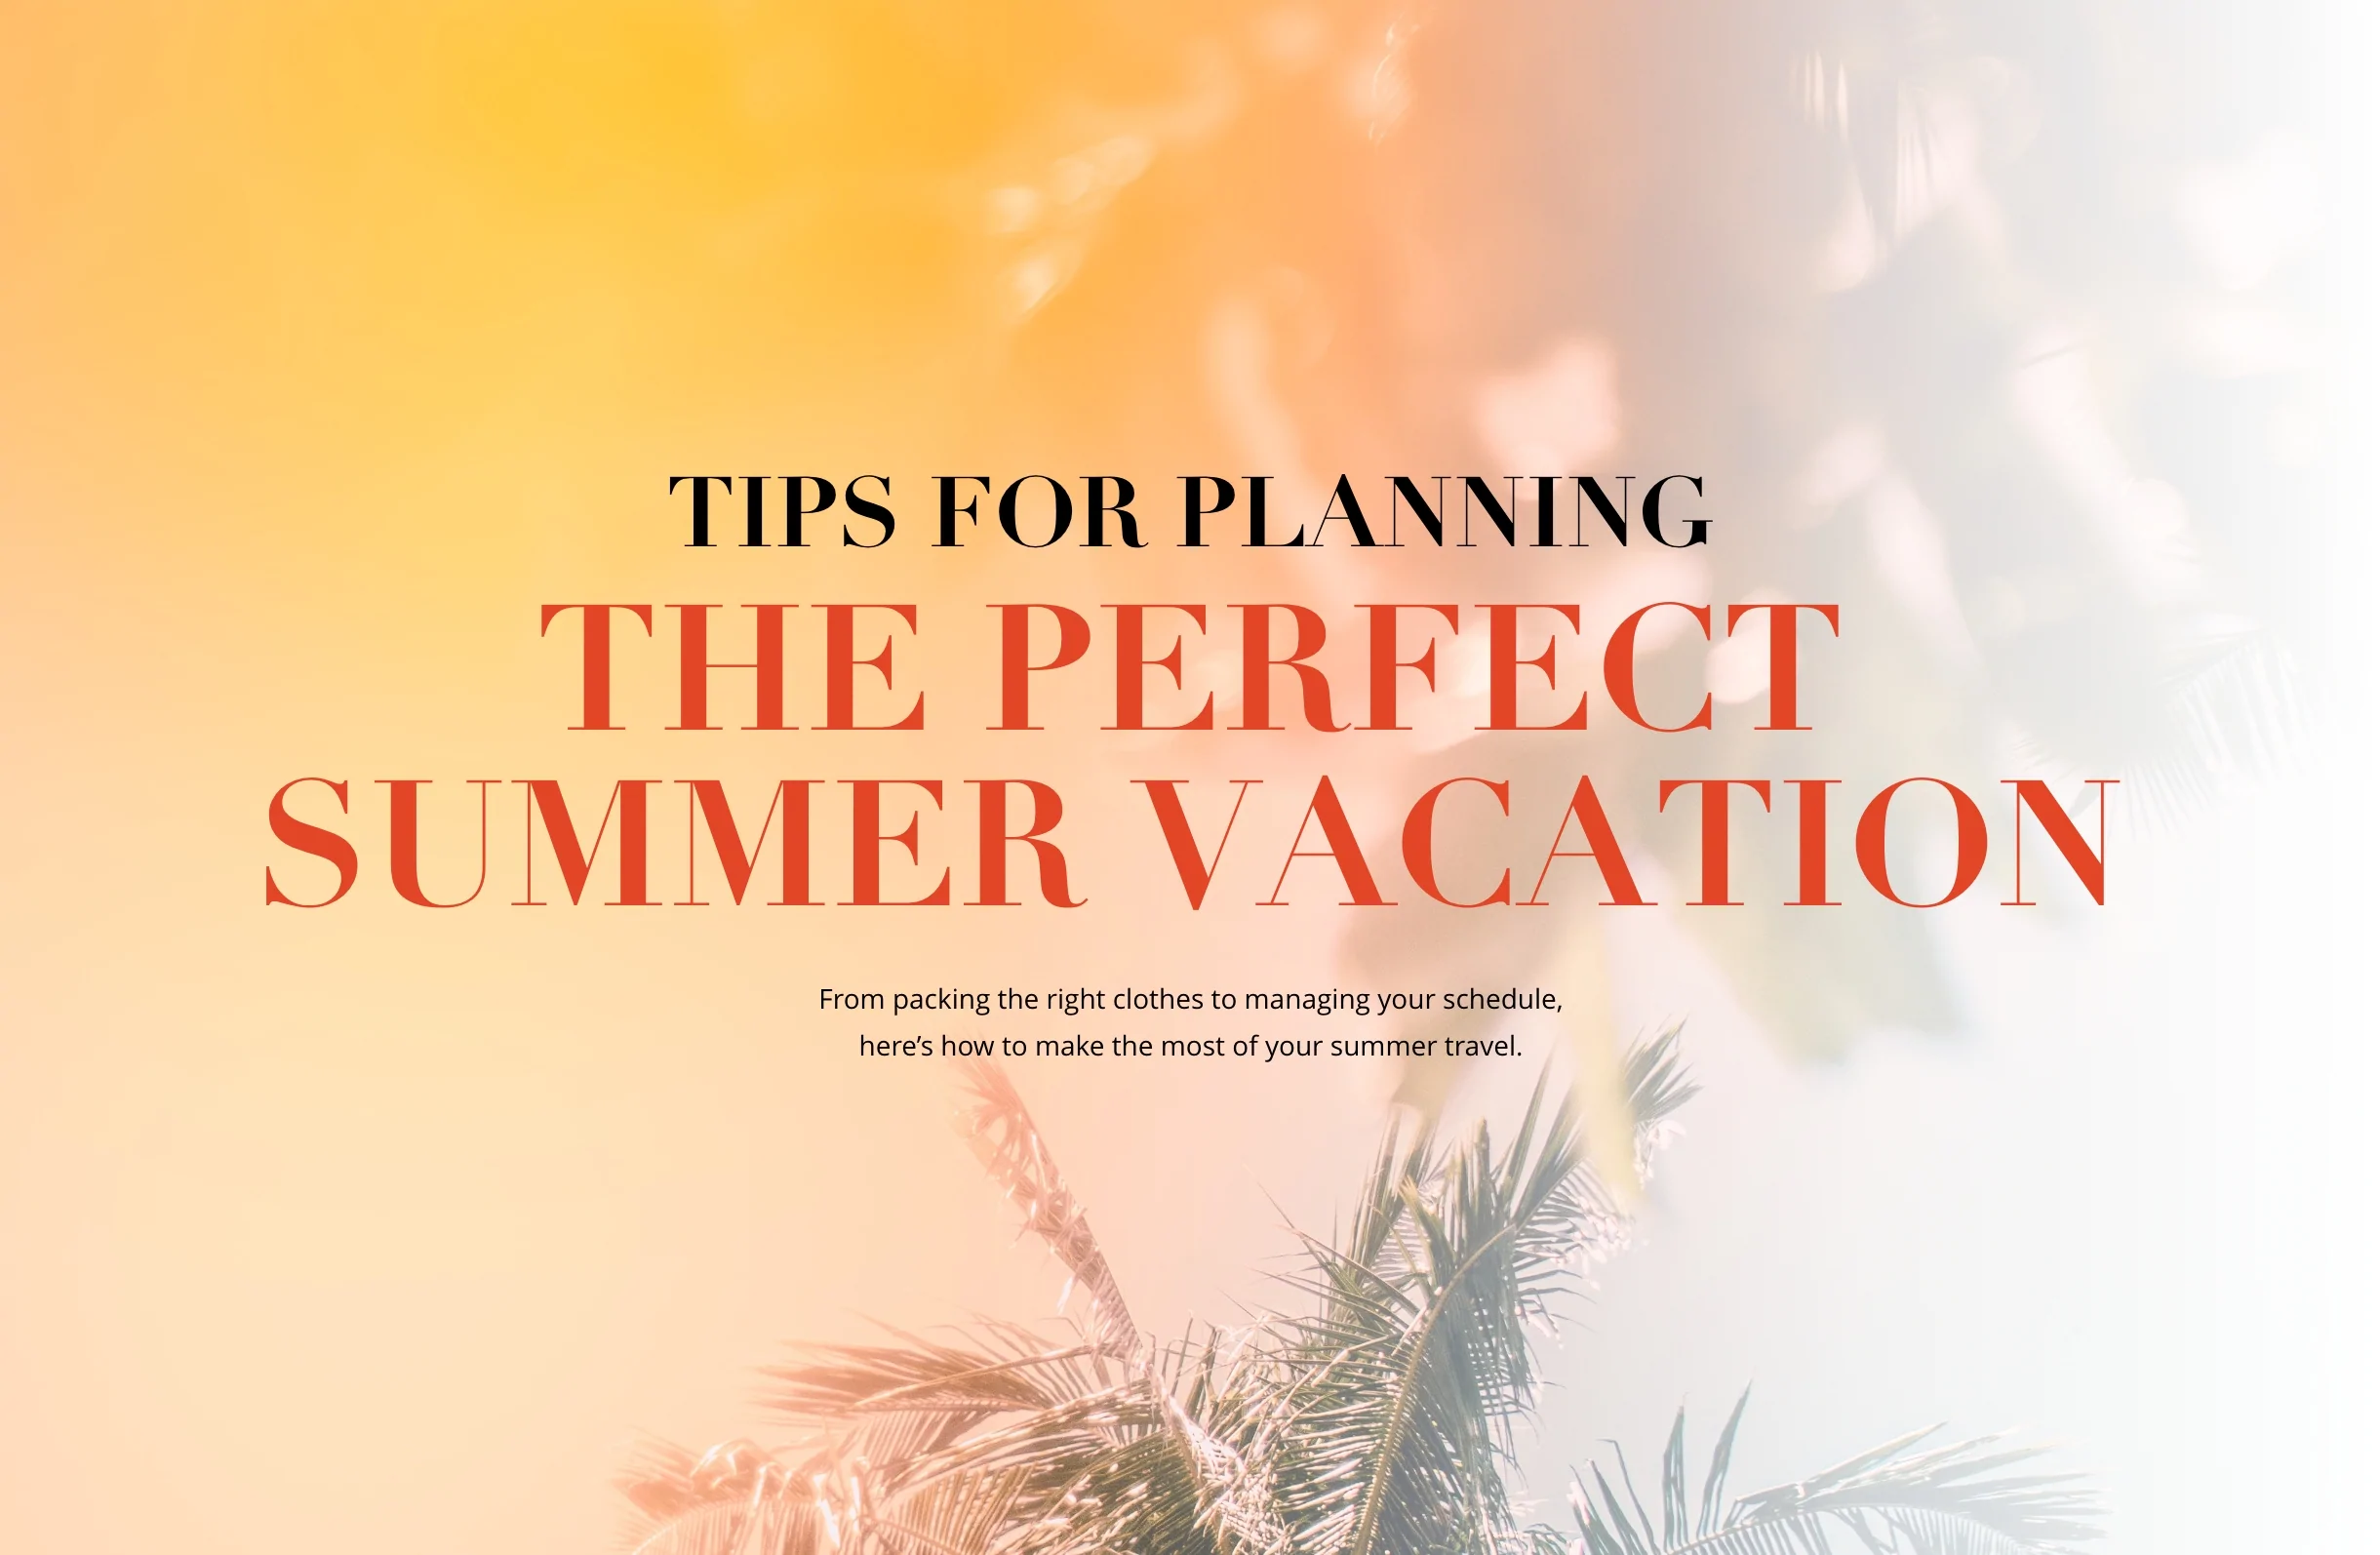 Tips for Planning the Perfect Summer Vacation